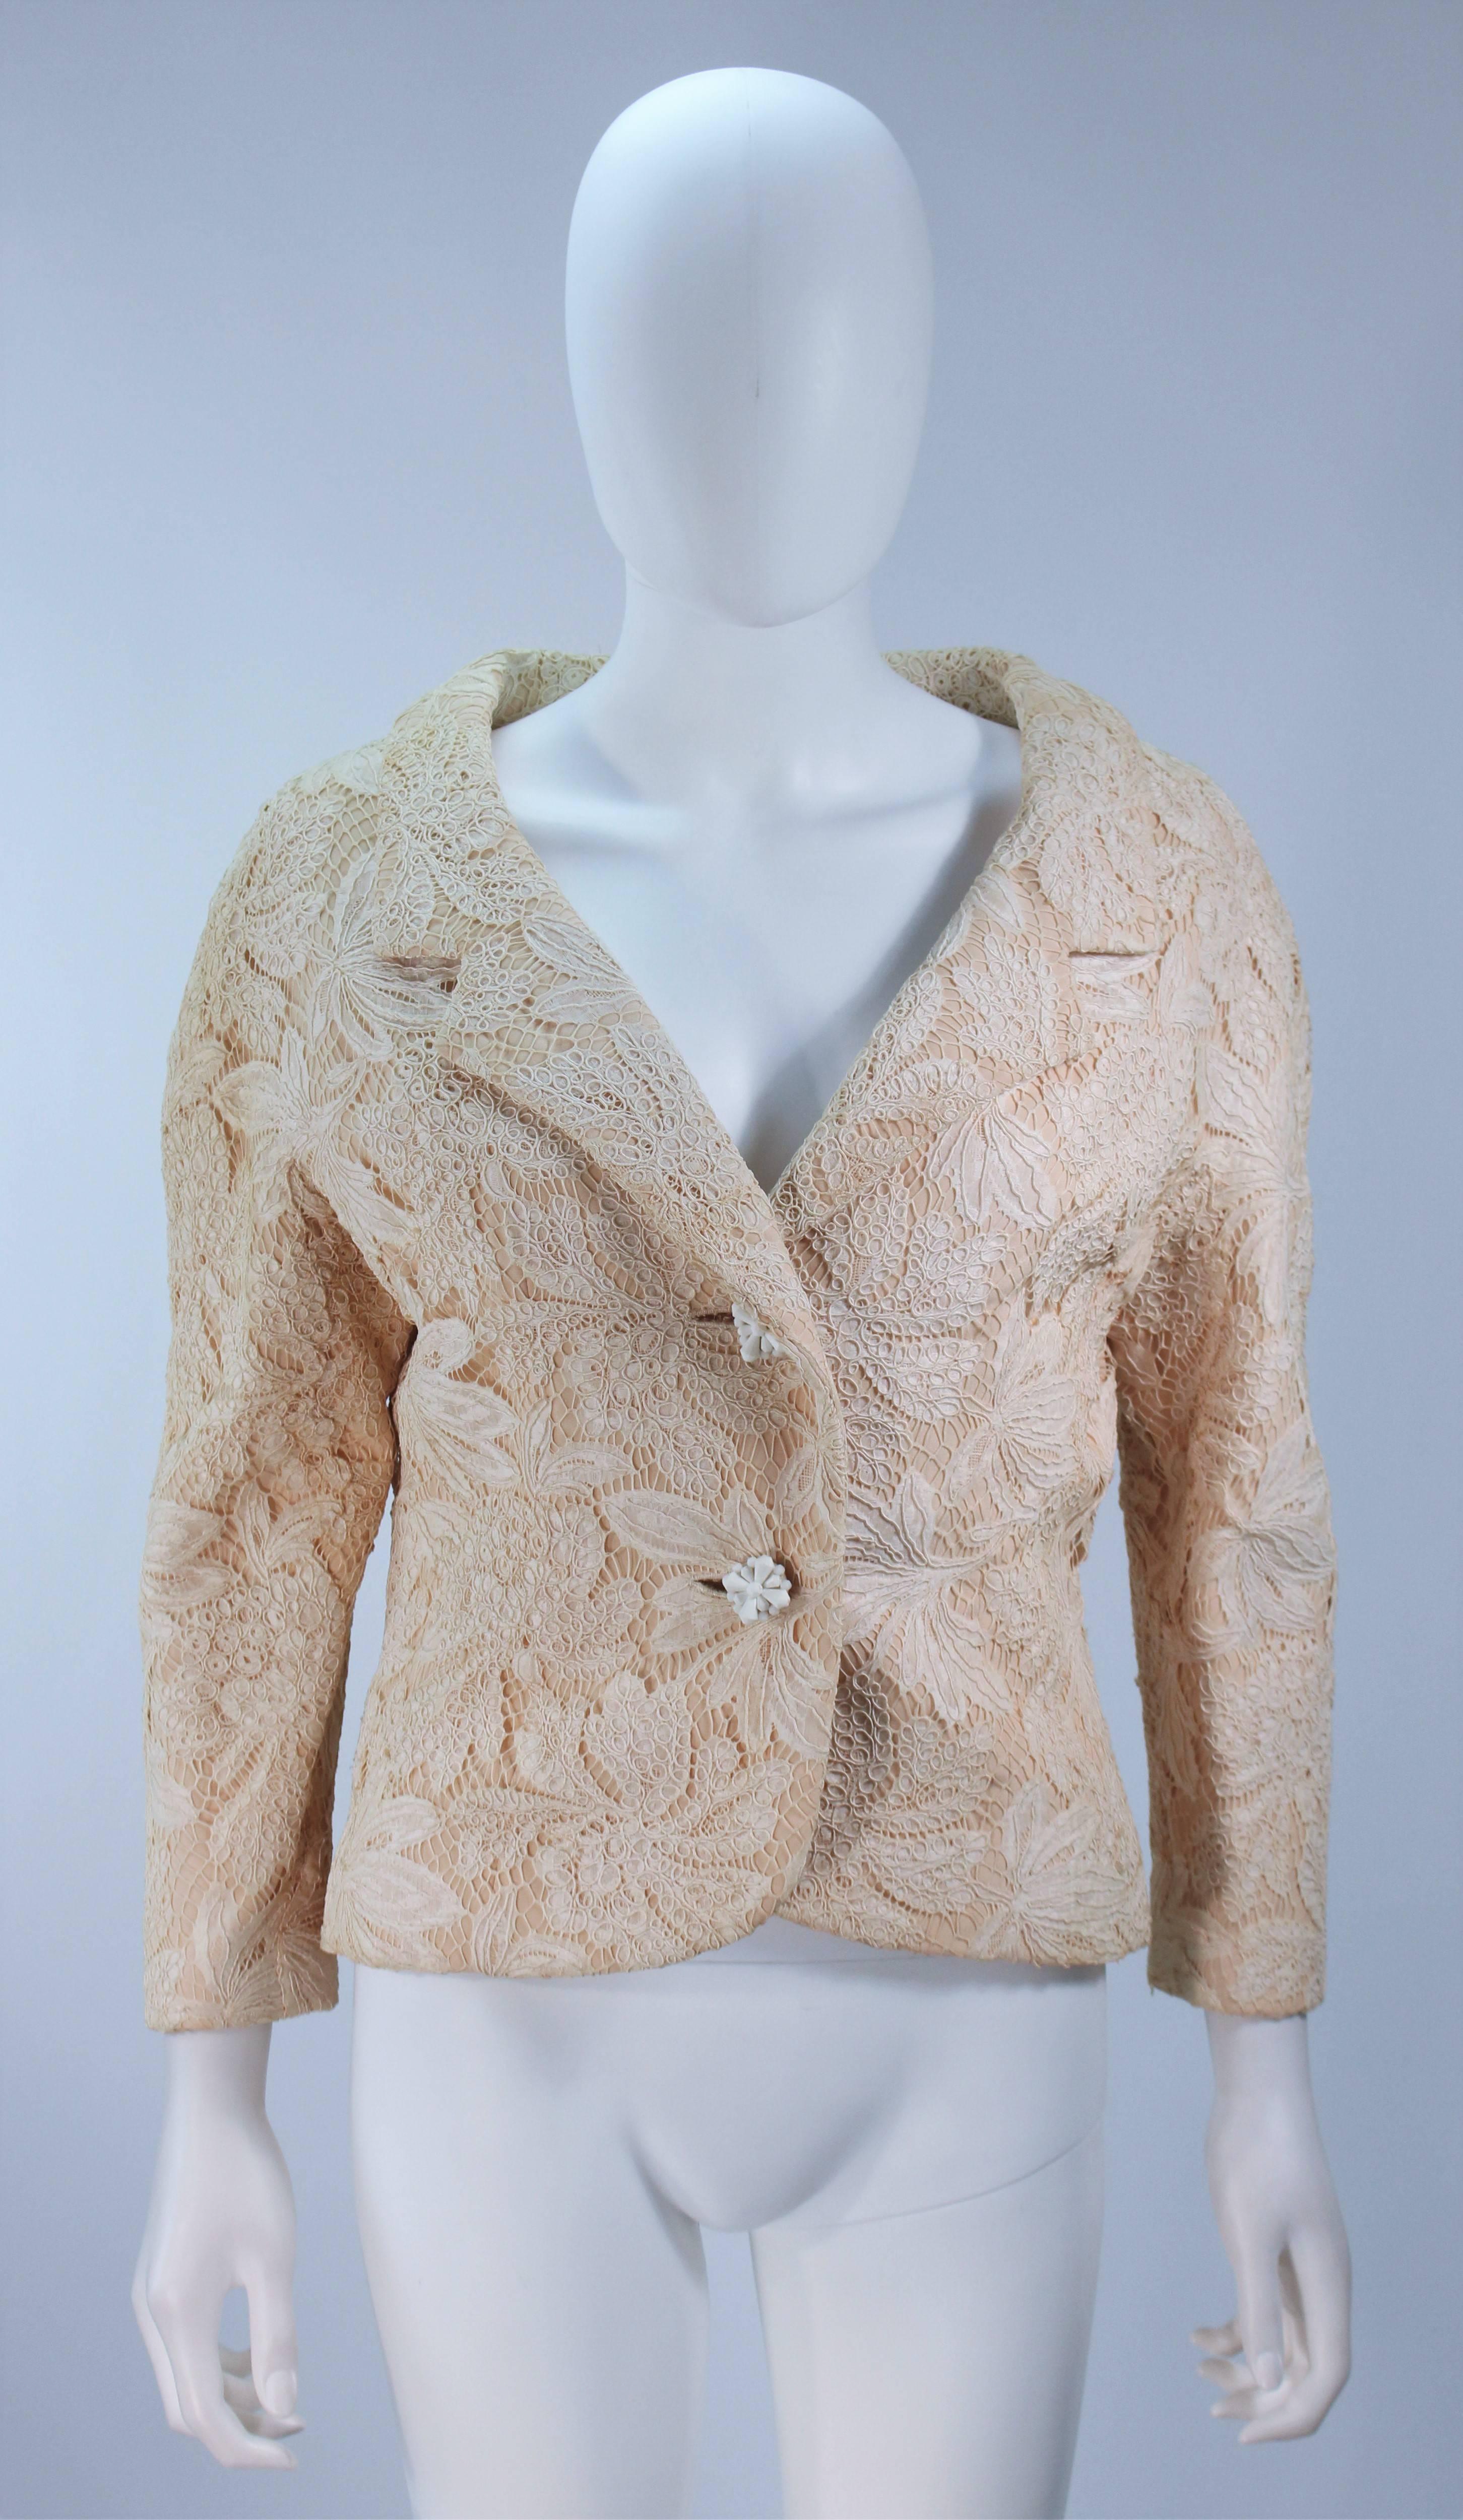  This Galanos jacket is composed of an off white cream hued floral lace. There are center front button closure with a wide neckline design. Silk lining. In excellent vintage condition. 

  **Please cross-reference measurements for personal